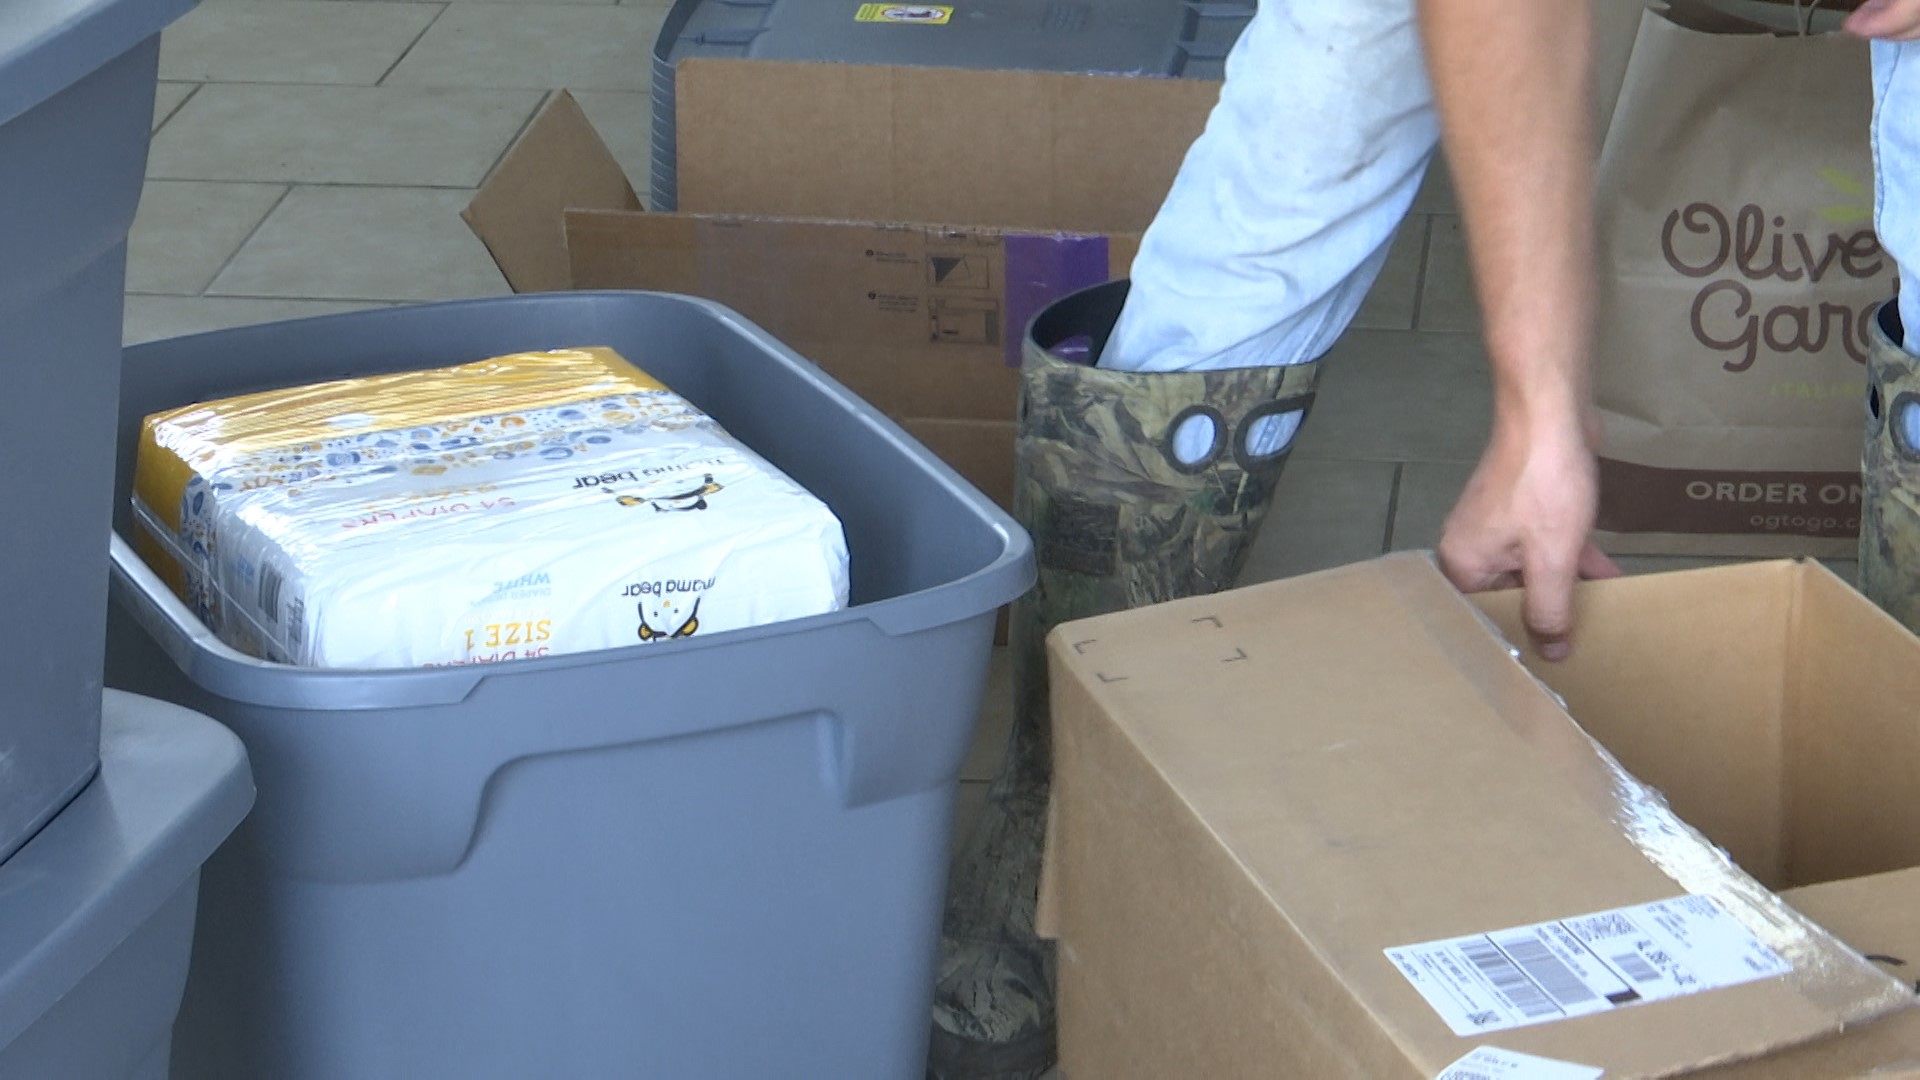 Robert Guinn with Grant Street Church of Christ talks about their plans to help people impacted by Tropical Storm Barry and how you can help, too.